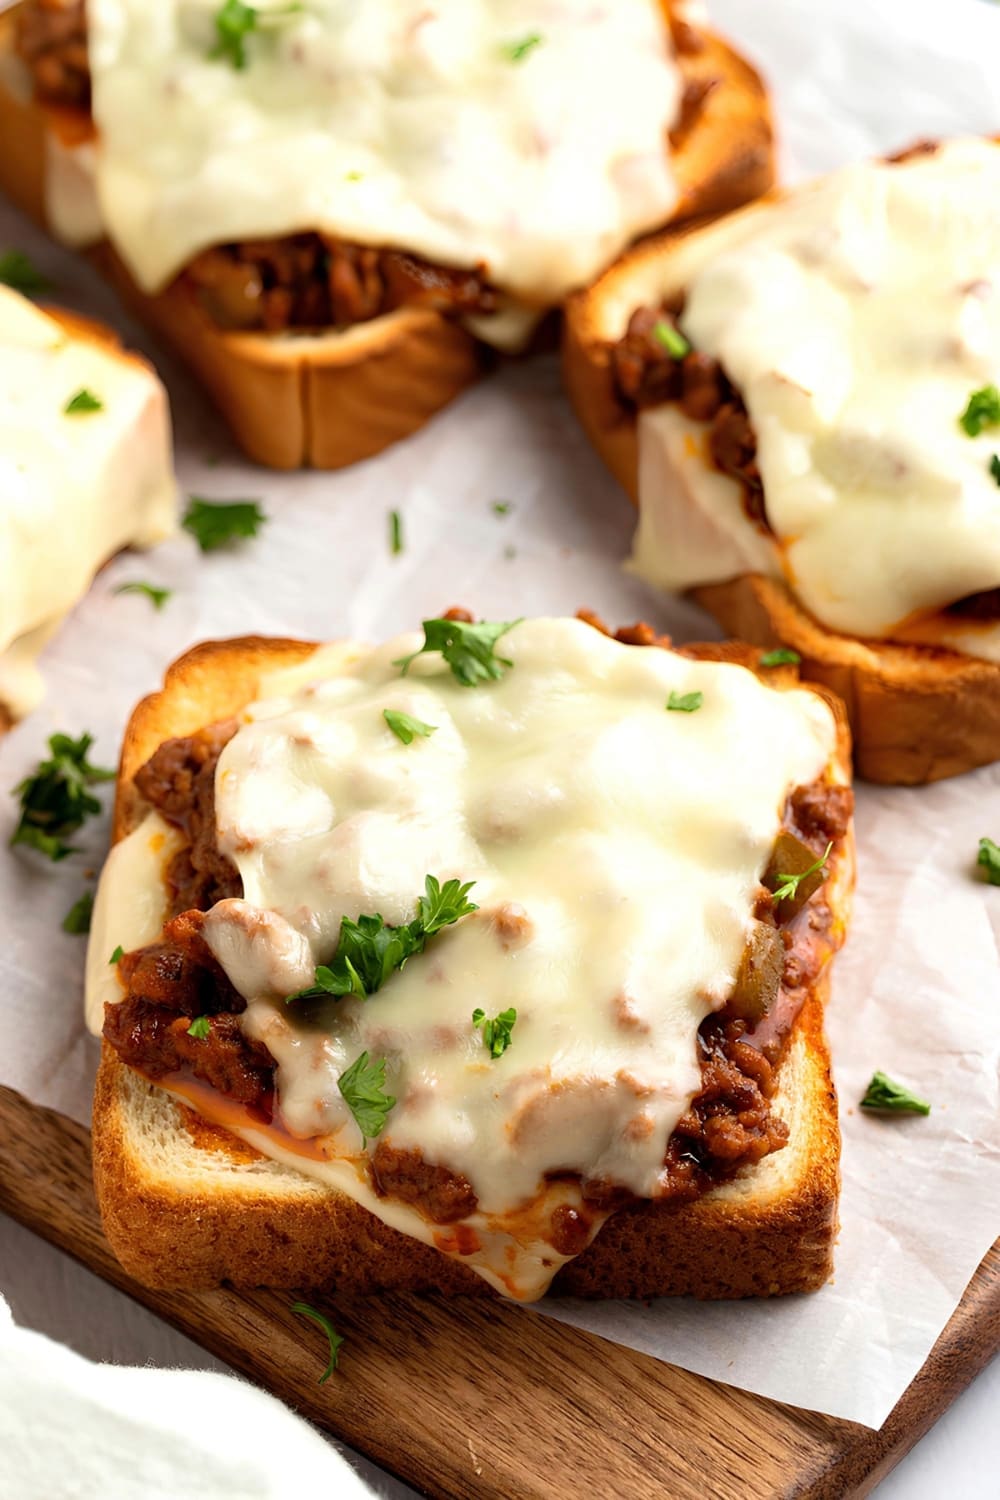 Homemade Toasted Bread Sloppy Joes with Ground Beef